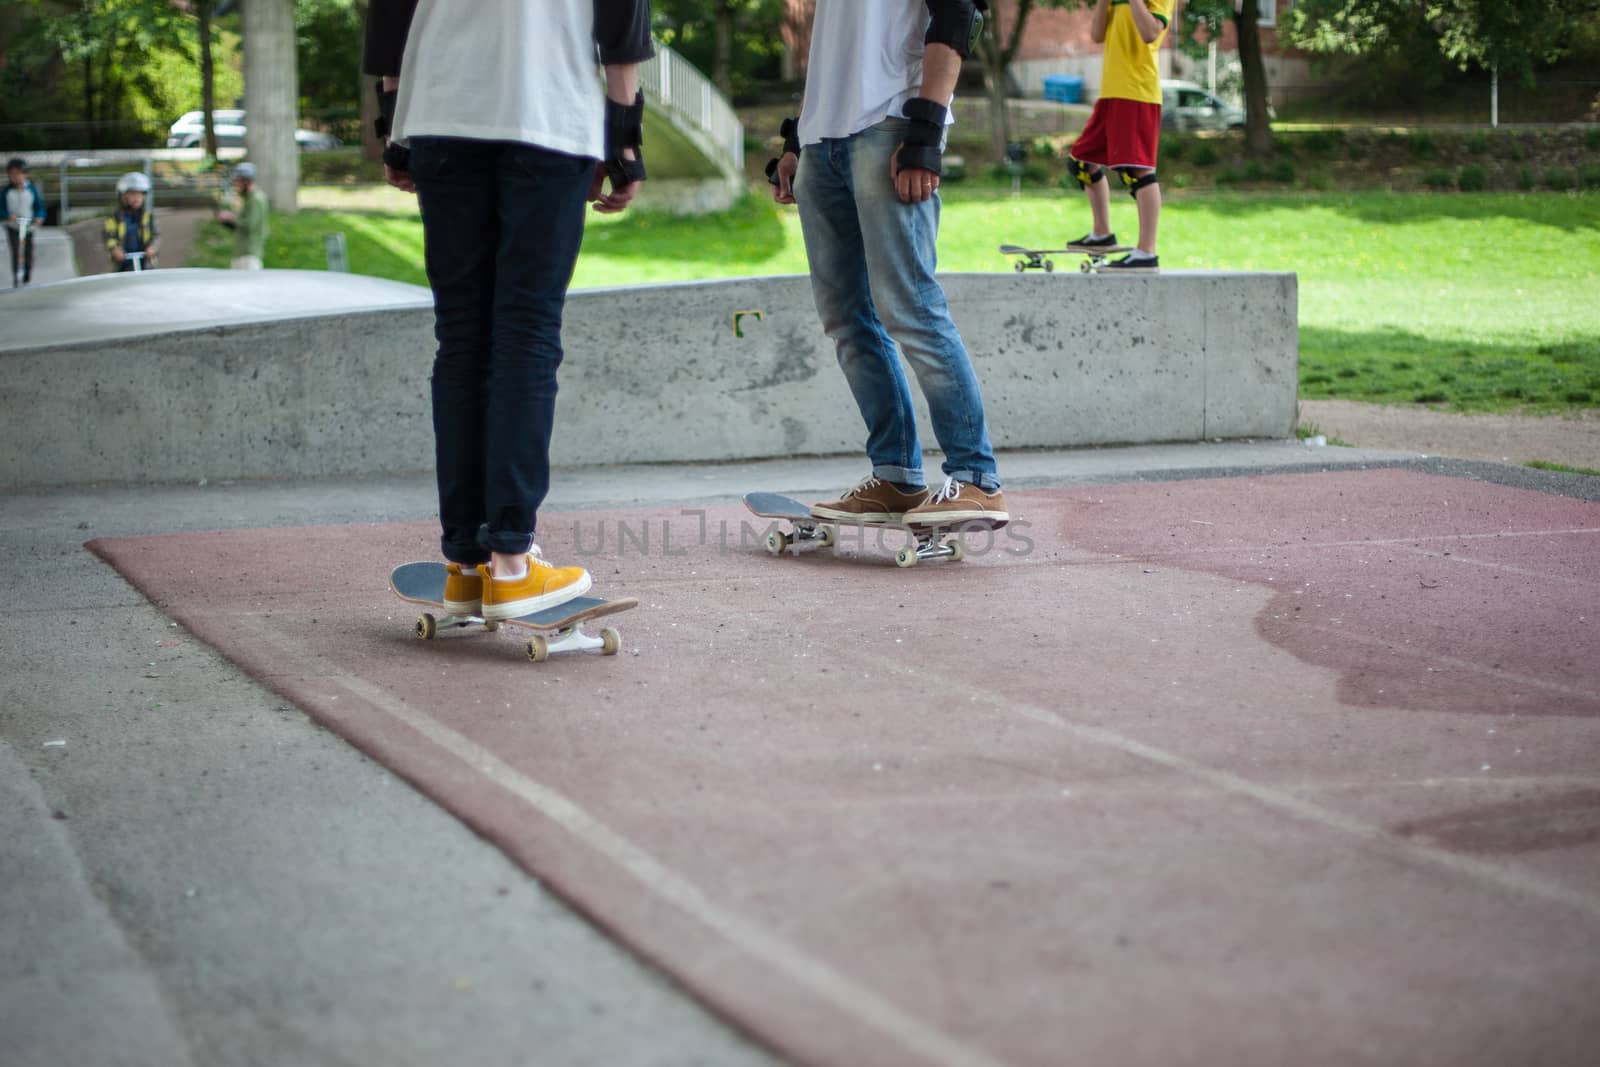 Powerful funny young guys are trained in a skate park by Softulka